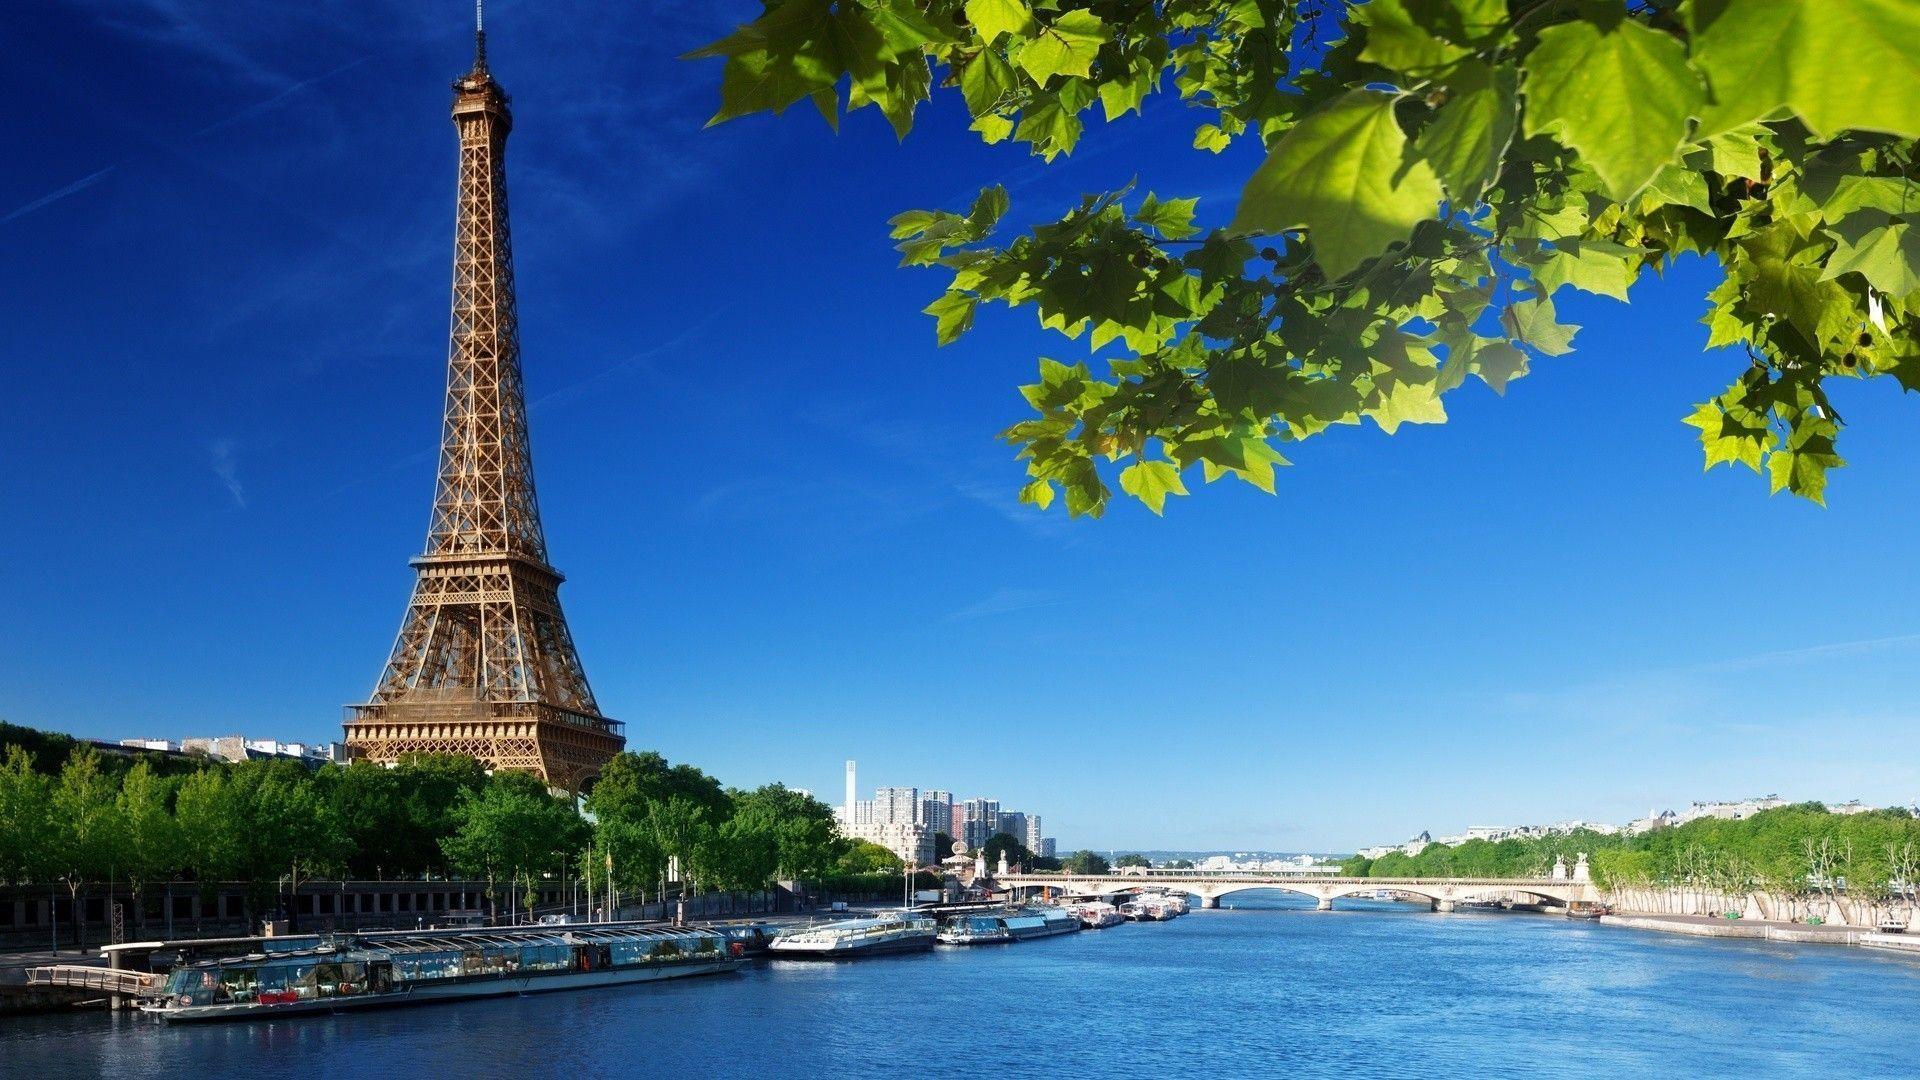 120 France wallpapers HD  Download Free backgrounds